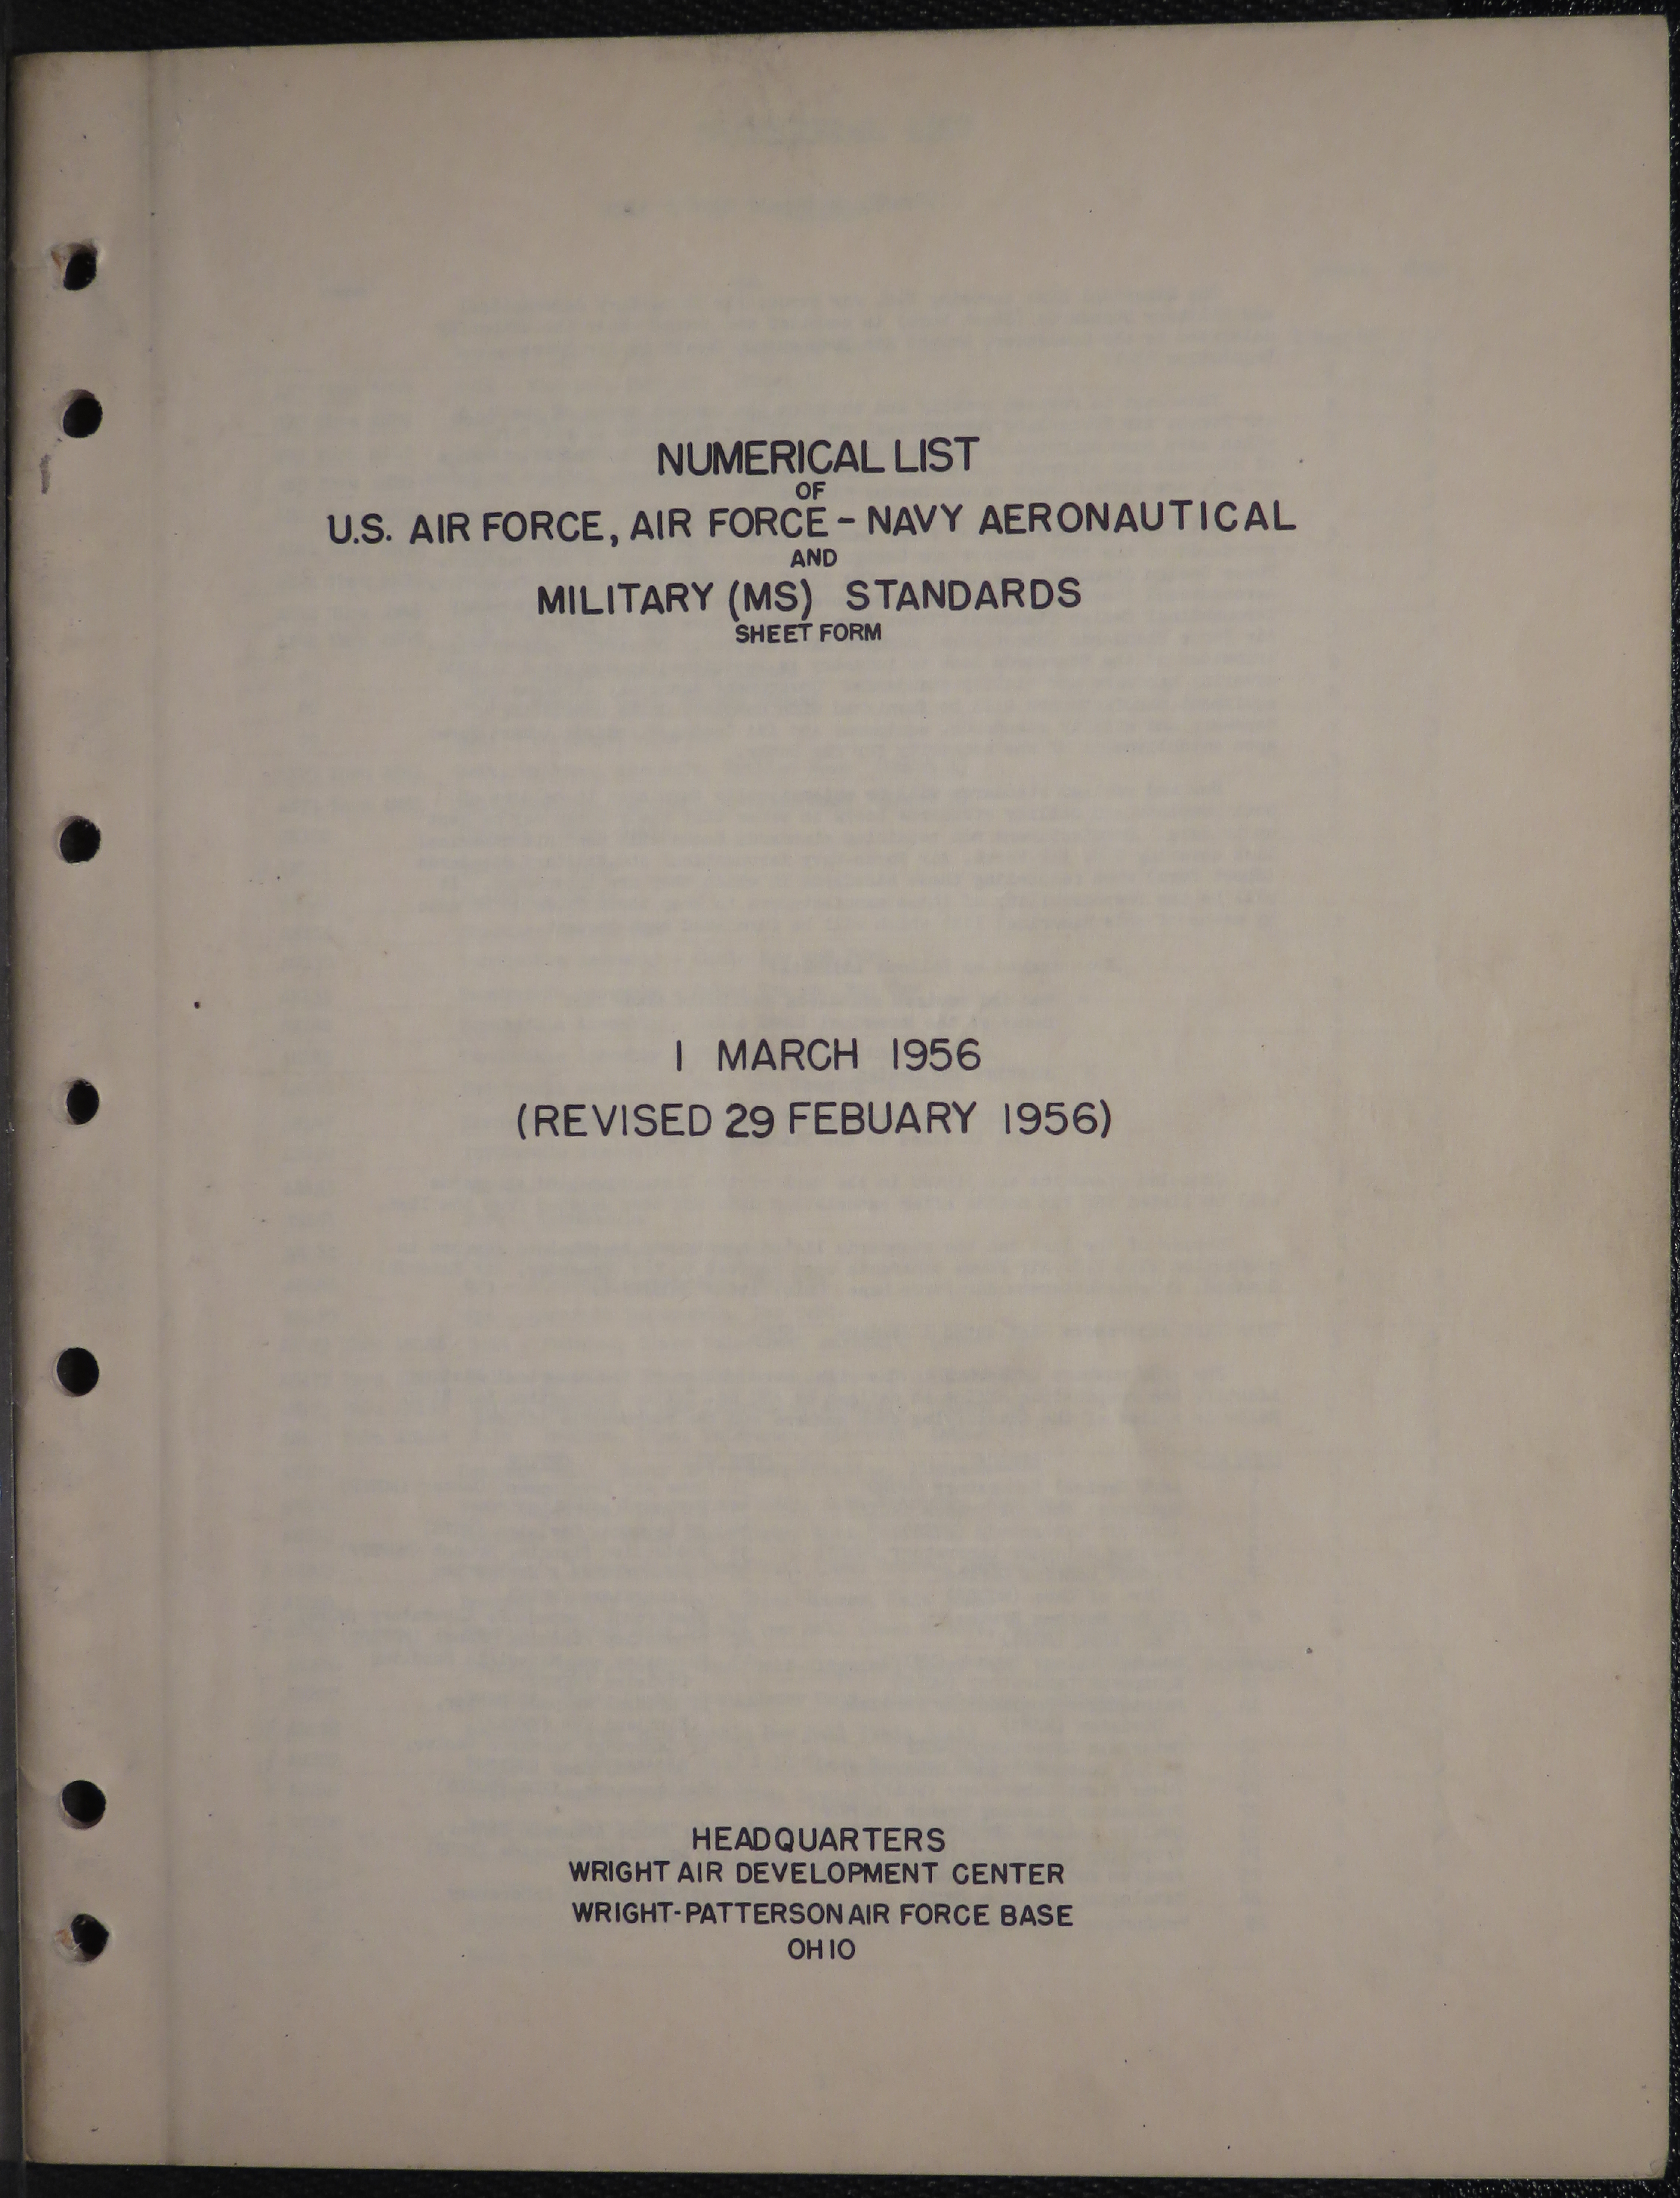 Sample page 1 from AirCorps Library document: Numerical List of US Air Force - Navy Aeronautical Military (MS) Standards